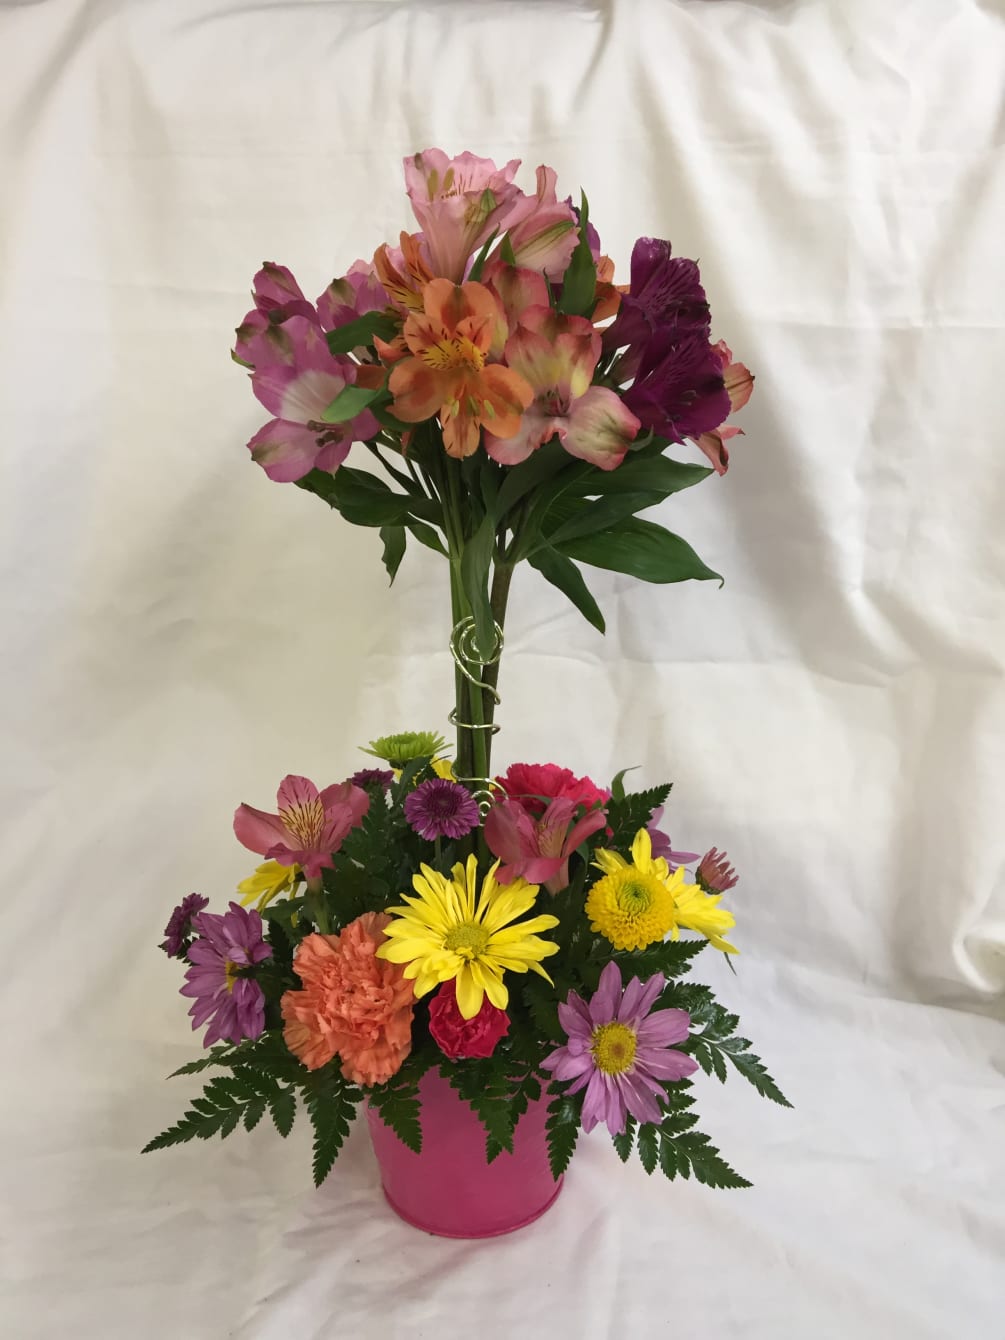 Topiary of alstroemeria blooms with assortment of fresh flowers below. Container color